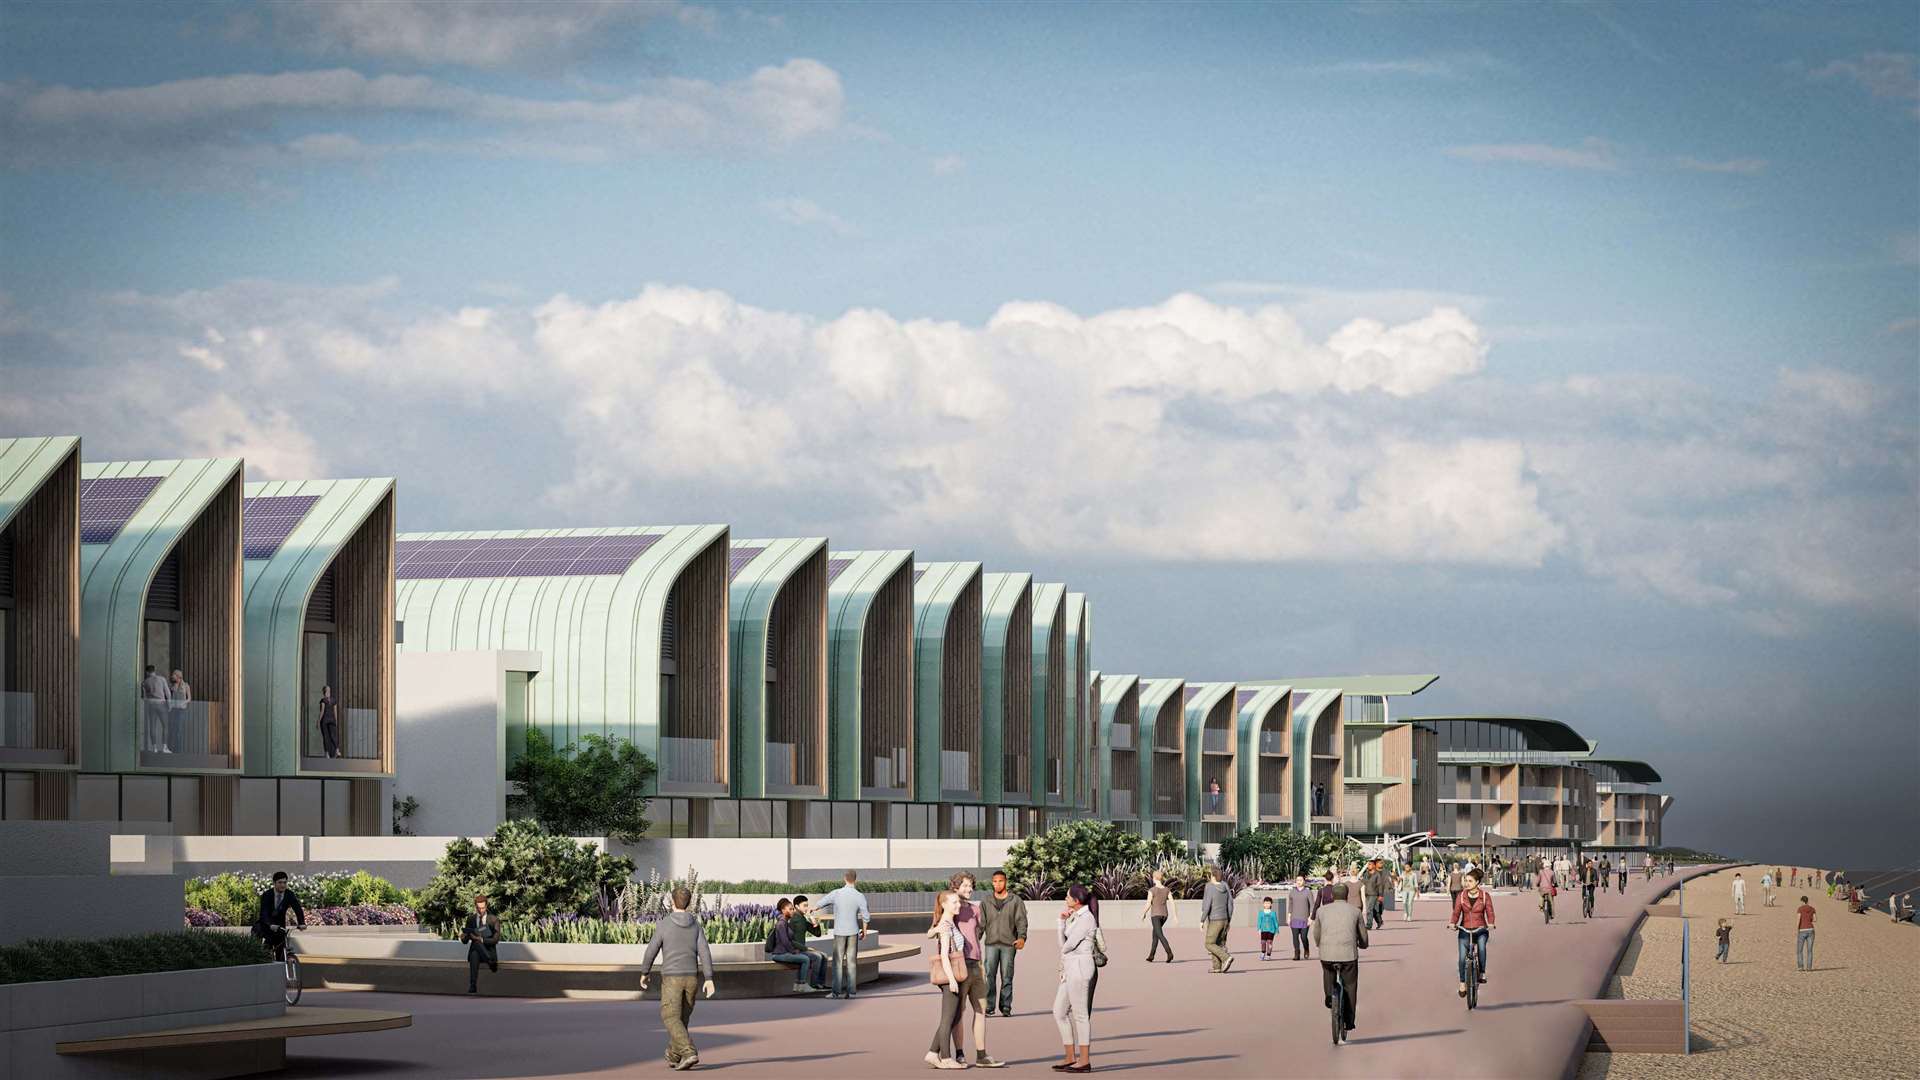 An artist’s impression showing how the now-axed Princes Parade project could have looked